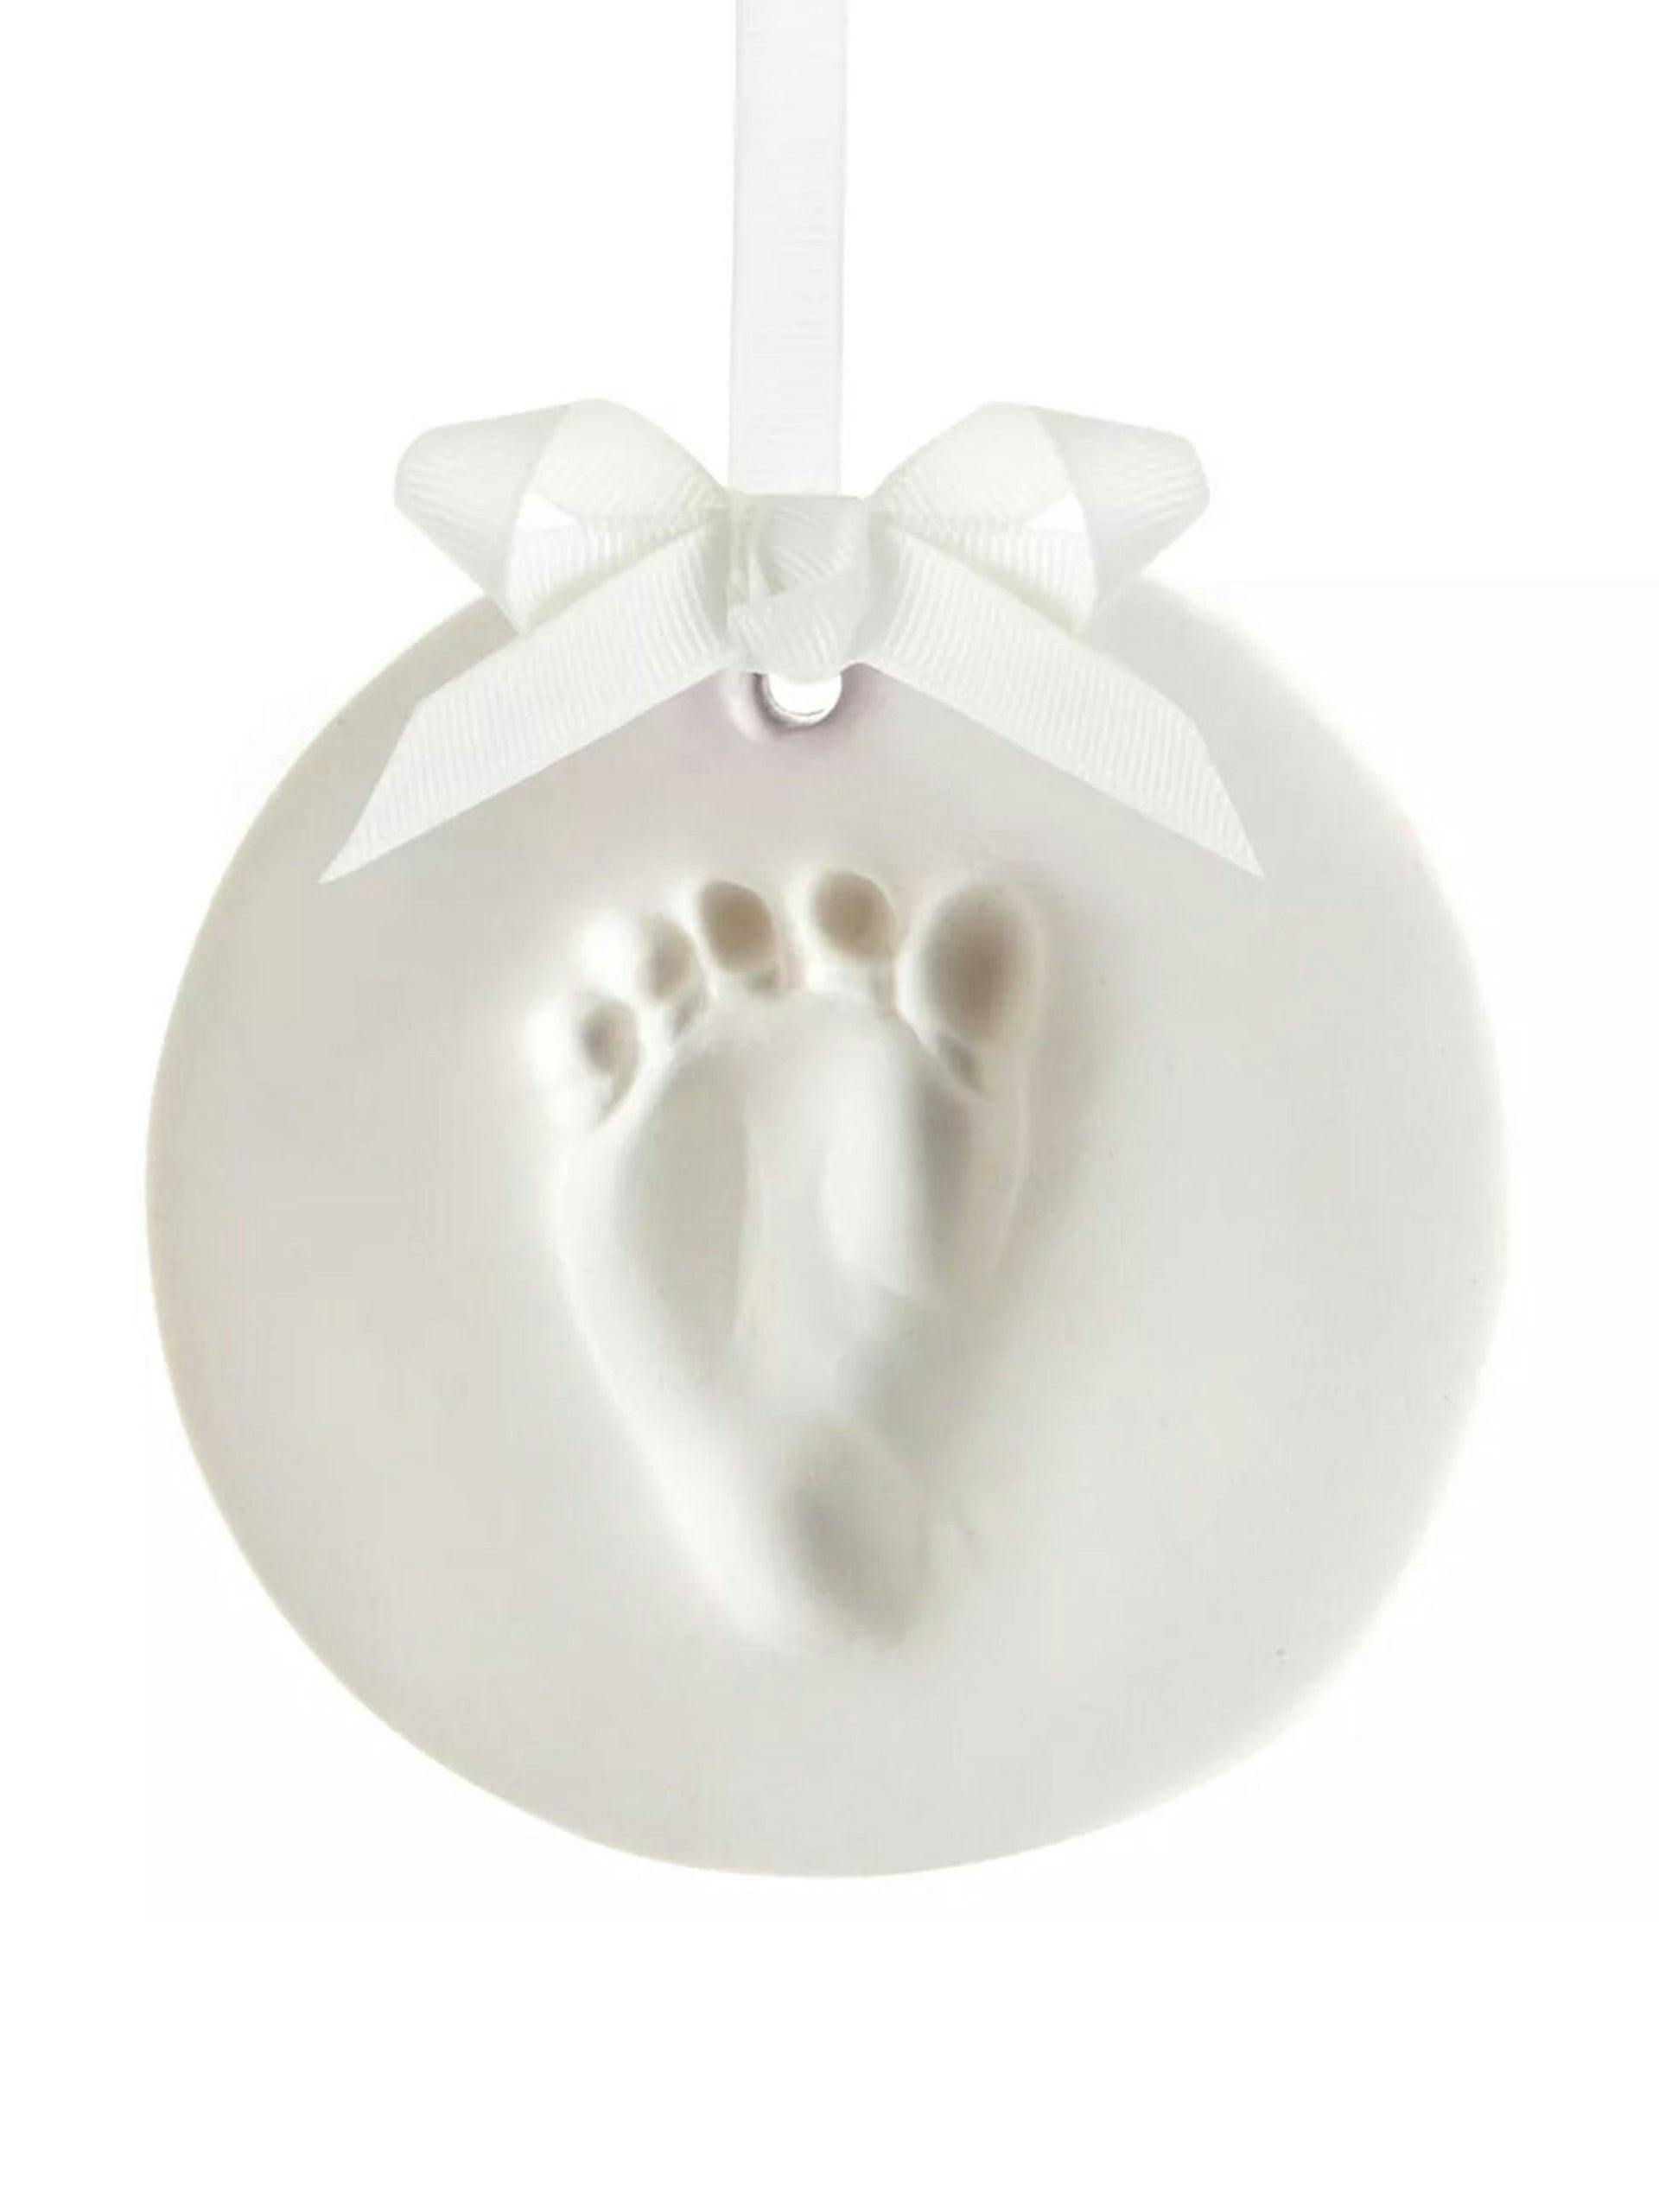 Clay Baby Hand & Foot Impression Moulding Kit